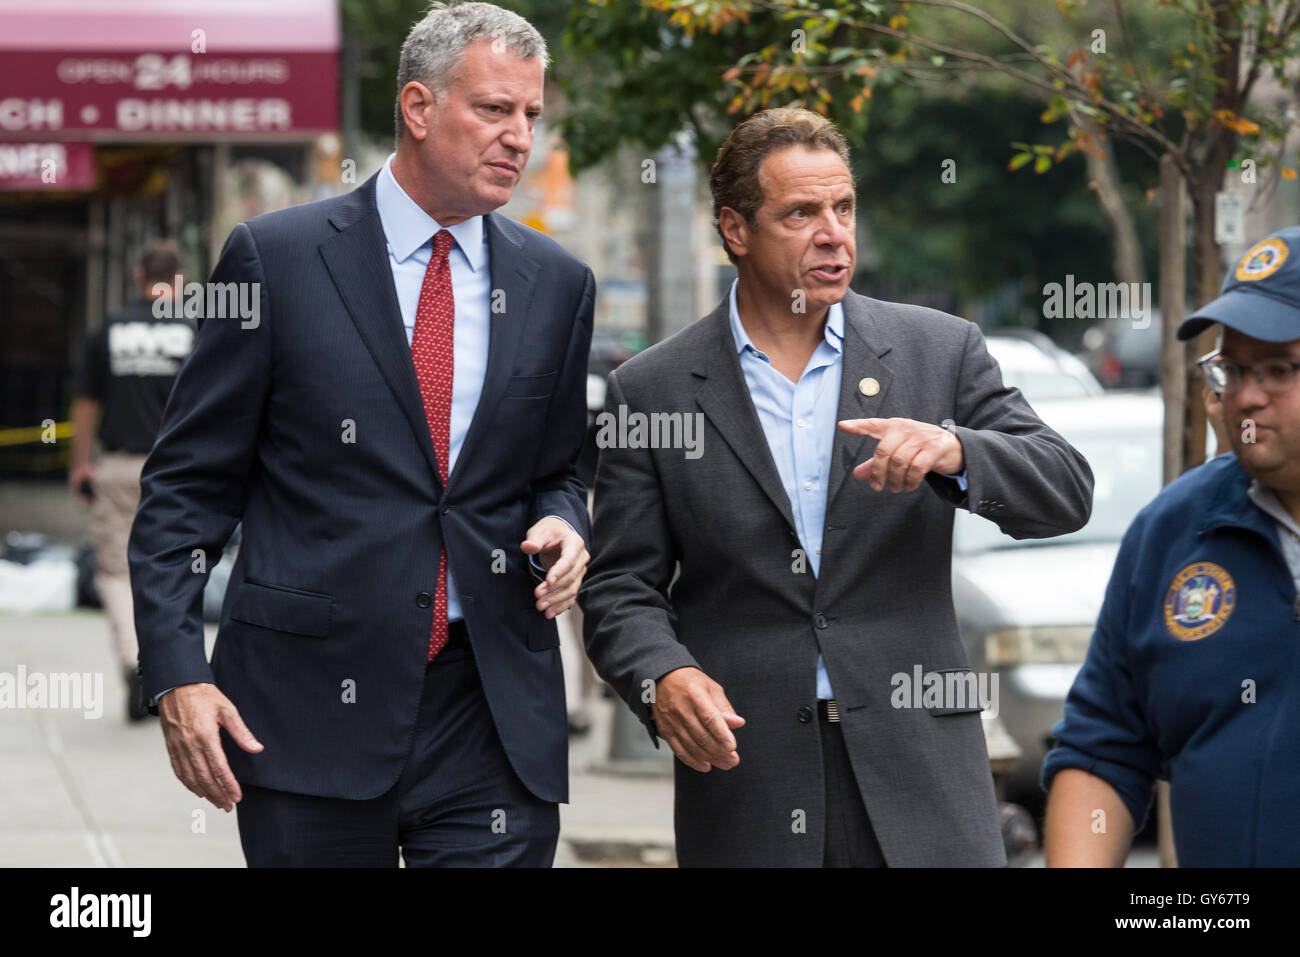 Chelsea, New York, USA. 18th Sept, 2016. New York State Governor Andre Cuomo and New York City Mayor (red tie) Bill de Blasio toured the site of the bomb explosion on West 23rd Street between Sixth and Seventh Avenues in Manhattan's Chelsea neighborhood, and then stopped at various local businesses to greet proprietors and residents. Credit:  PACIFIC PRESS/Alamy Live News Stock Photo